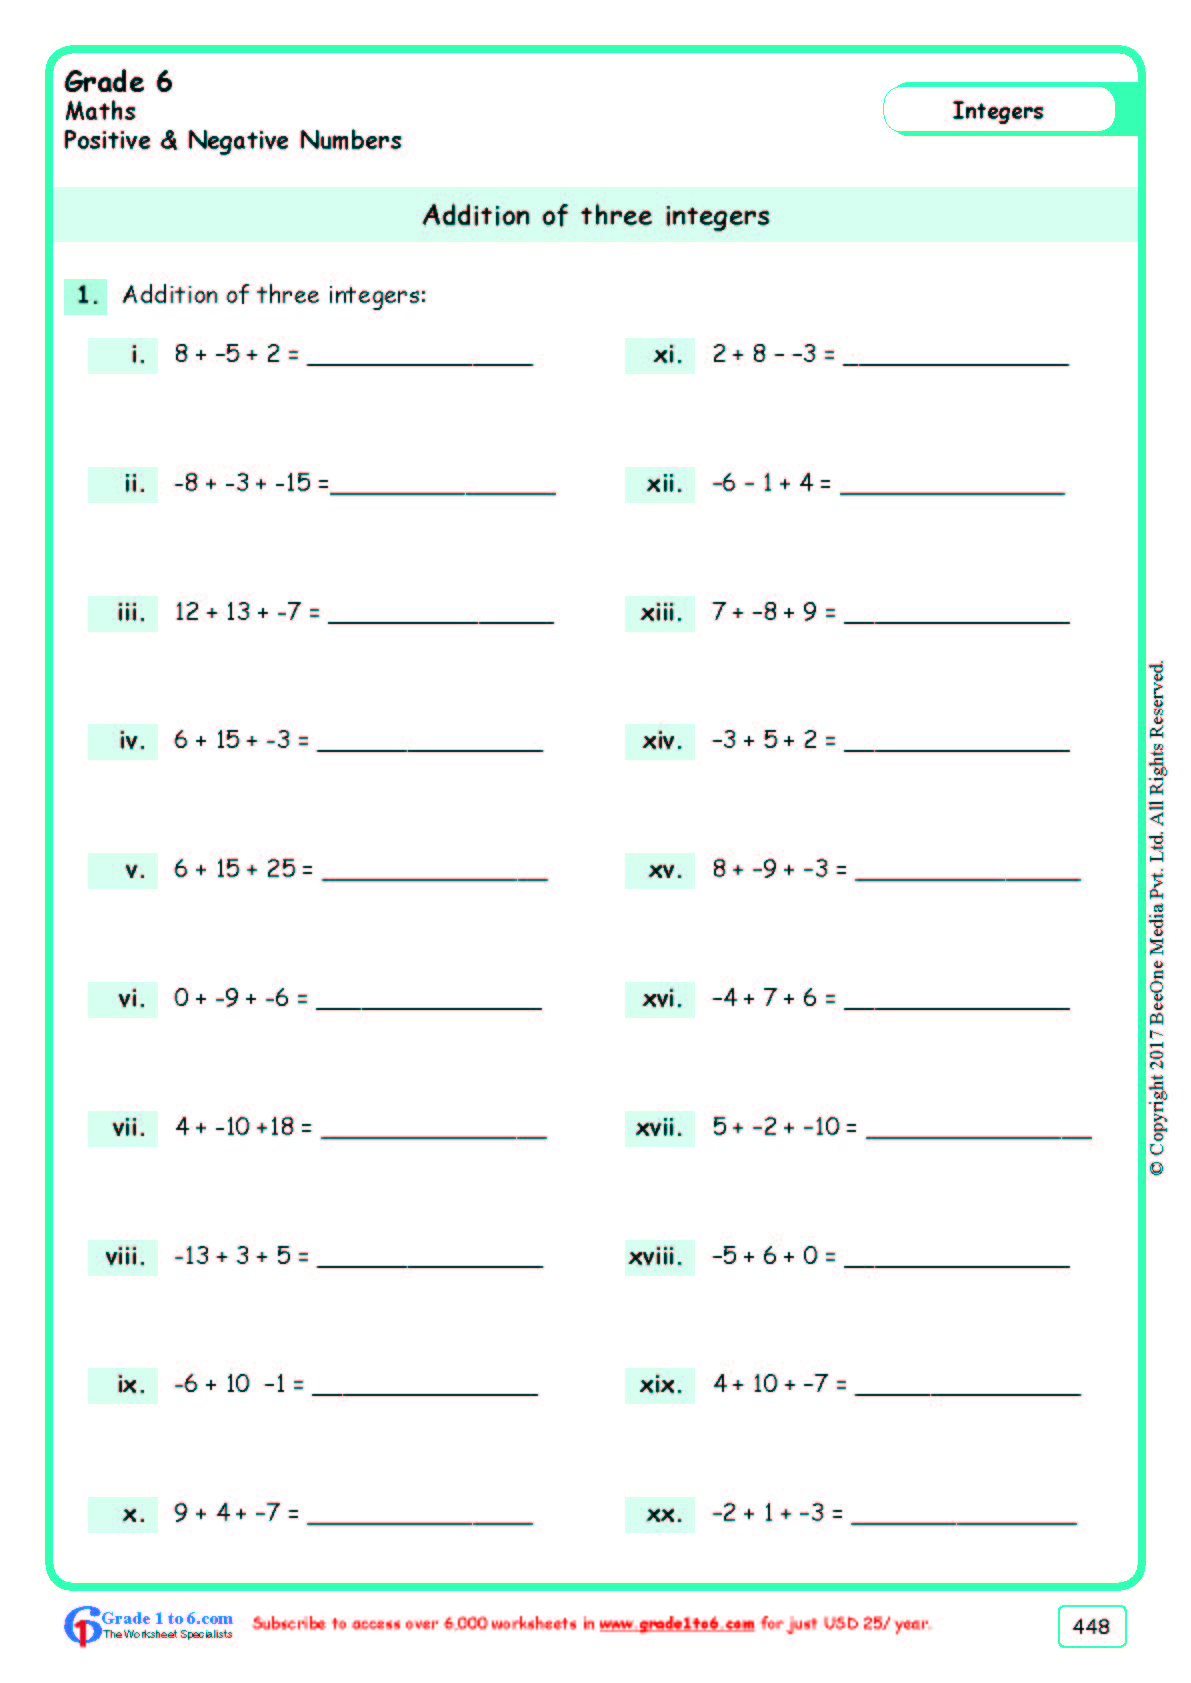 free-math-worksheets-for-grade-6-class-6-ib-cbse-icse-k12-and-all